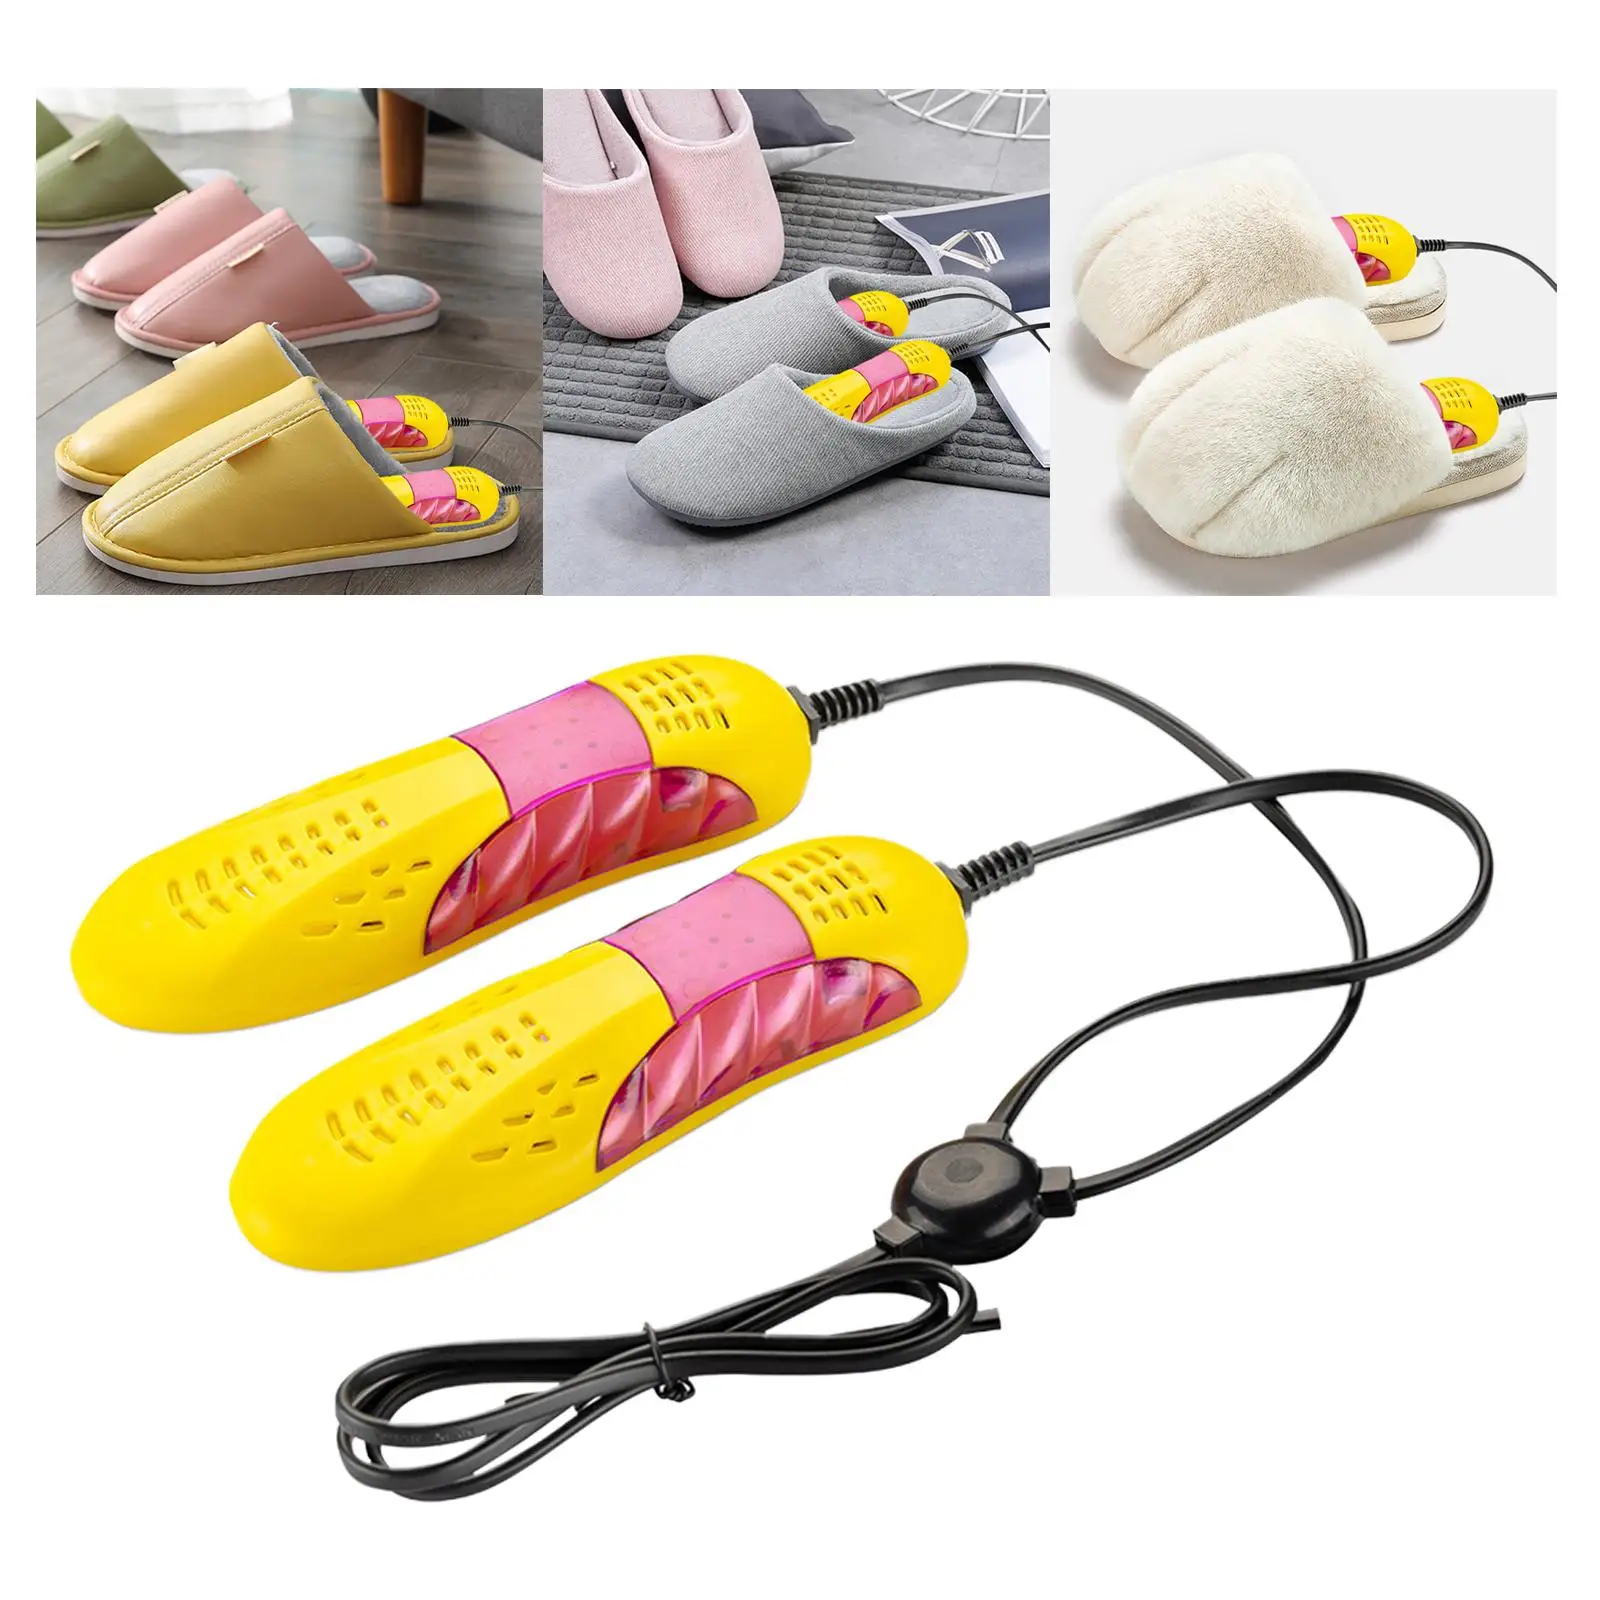 Portable Shoe Dryer Eliminate Damp & Odor Race Car Shape Compact Glove Dryer Boot Dryer for Work Boots Shoe Warmer for Outdoor